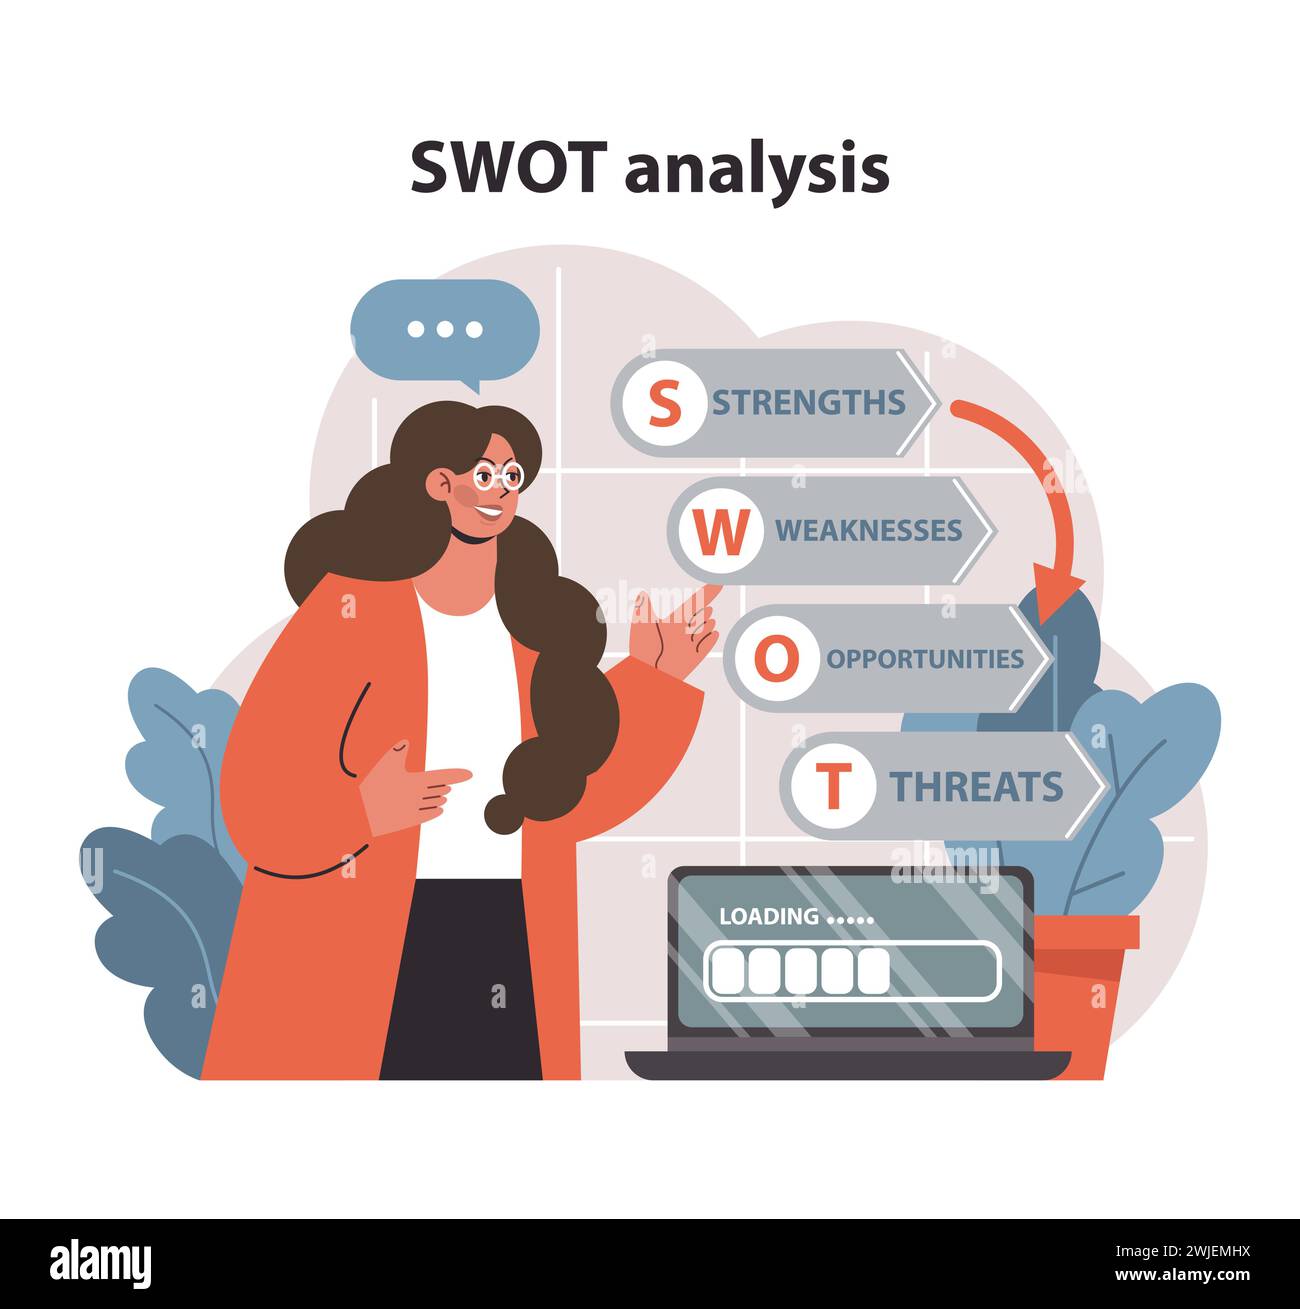 Market penetration concept. A professional woman deciphers business potential using SWOT analysis. Balancing strengths, weaknesses, opportunities, threats. Comprehensive review. vector illustration. Stock Vector